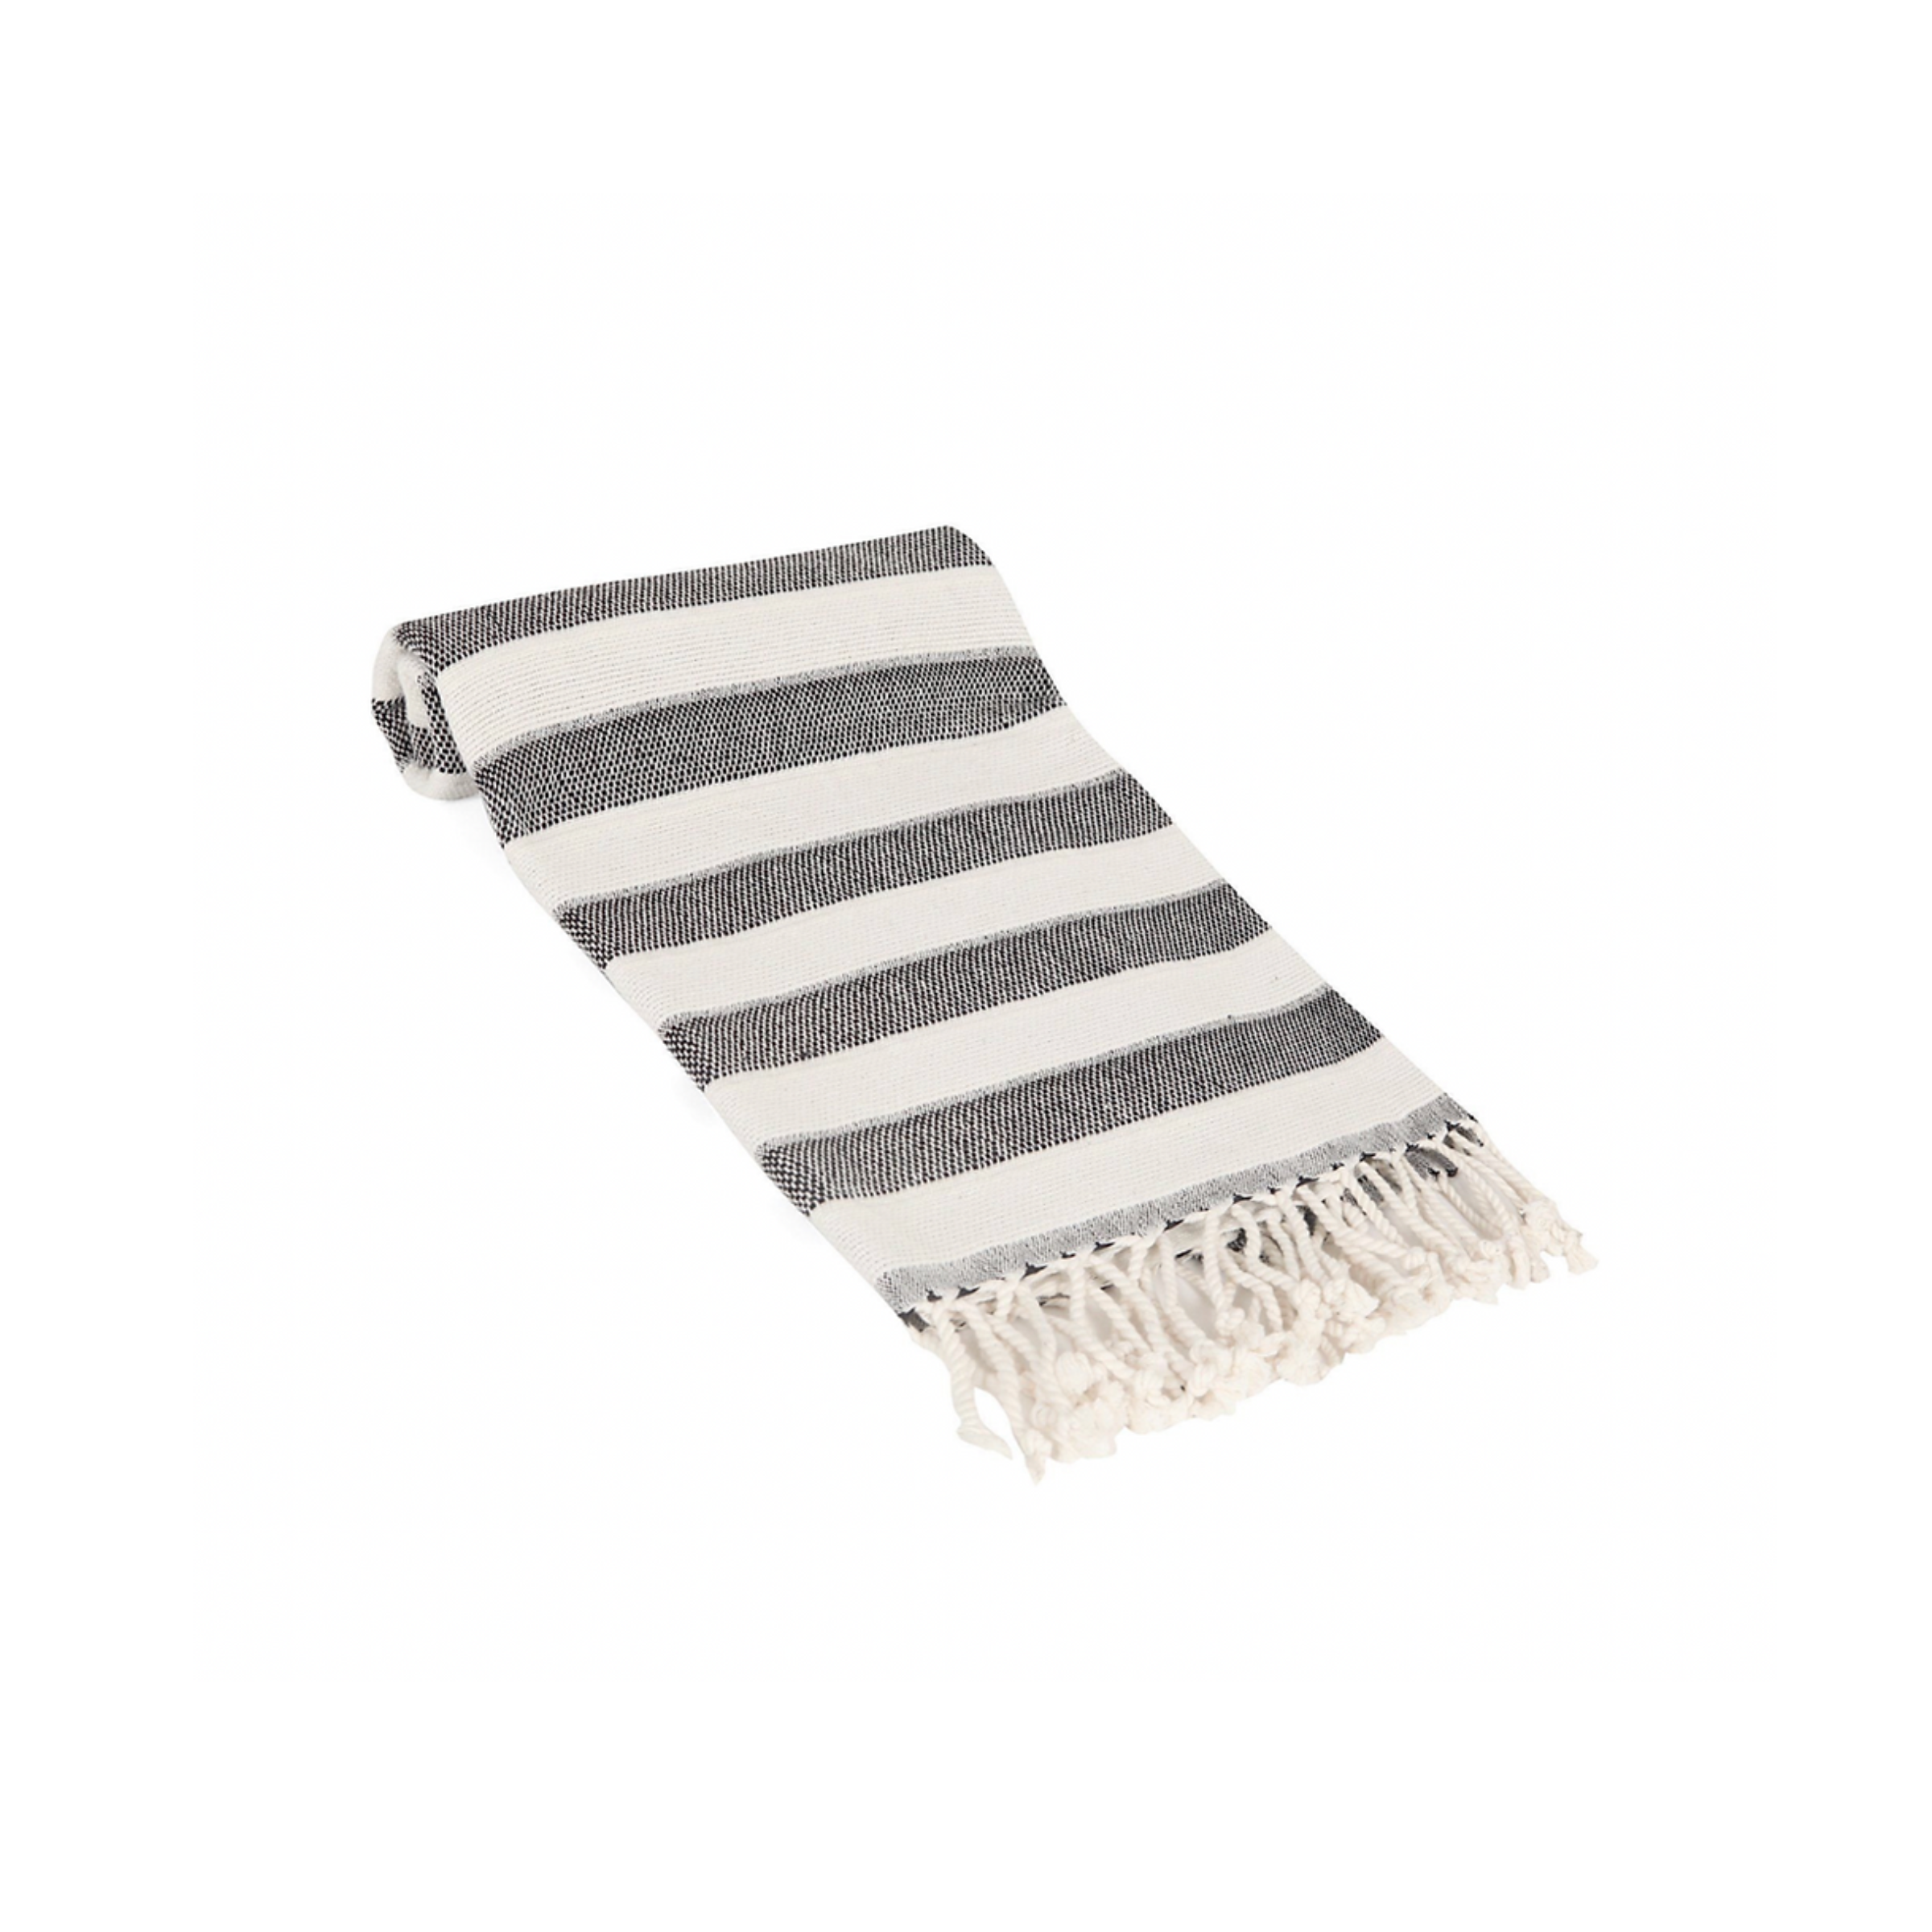 Stripe Turkish Hand Towel – Priti Collection. Tools for an enlightened life.